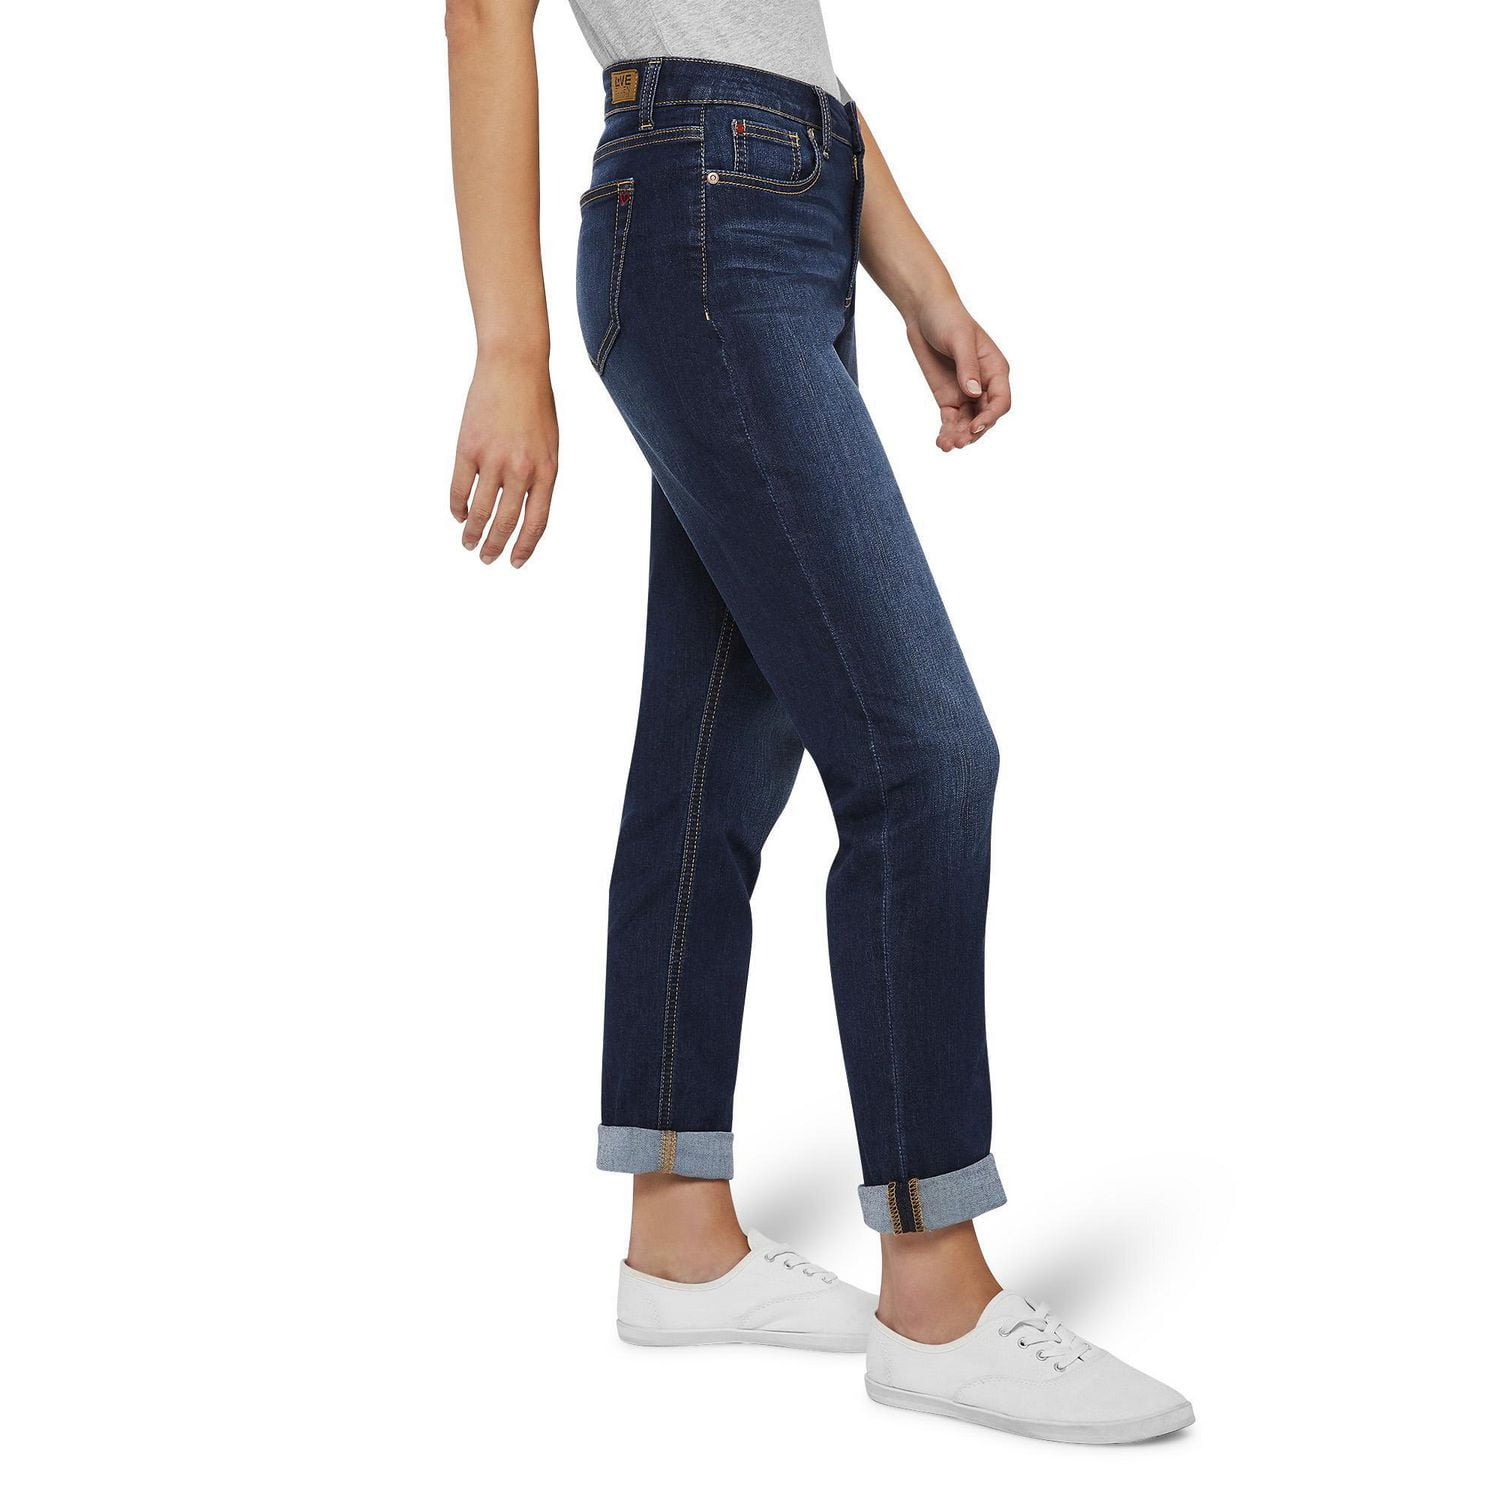 Women's Mid Rise Relaxed Fit Stretch Jeans